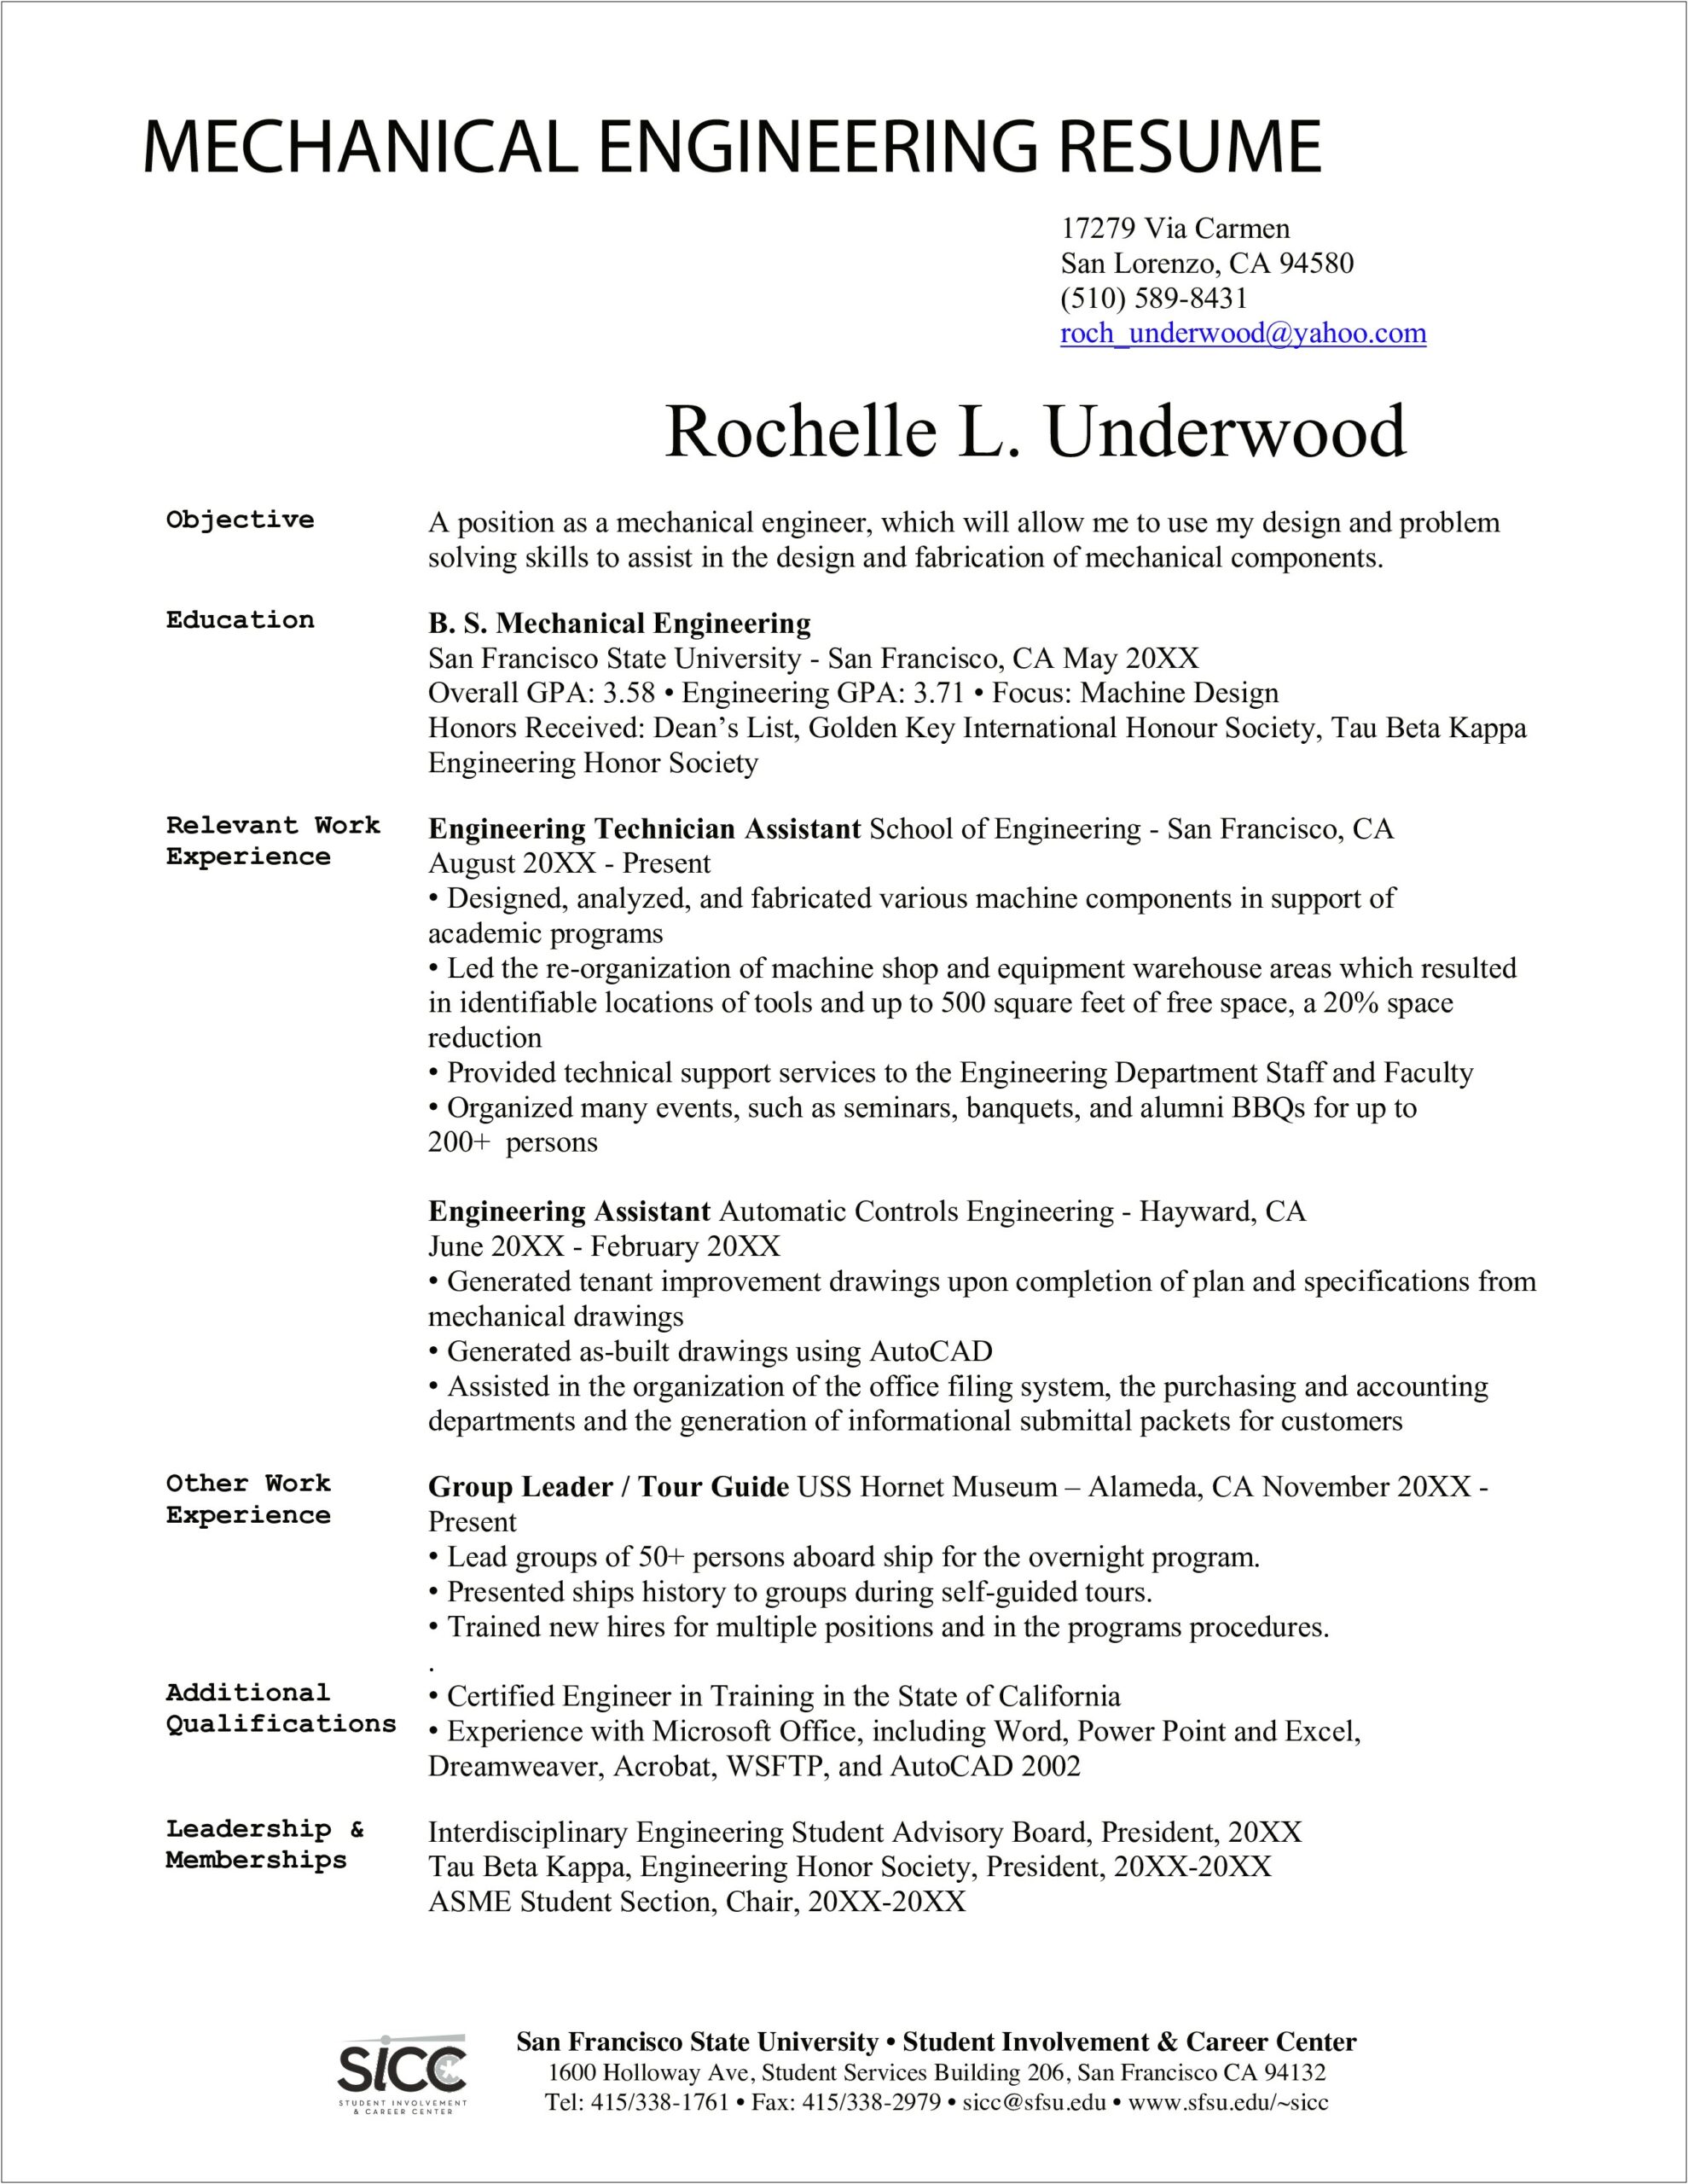 Computer Aided Mechanical Drafting Resume Examples